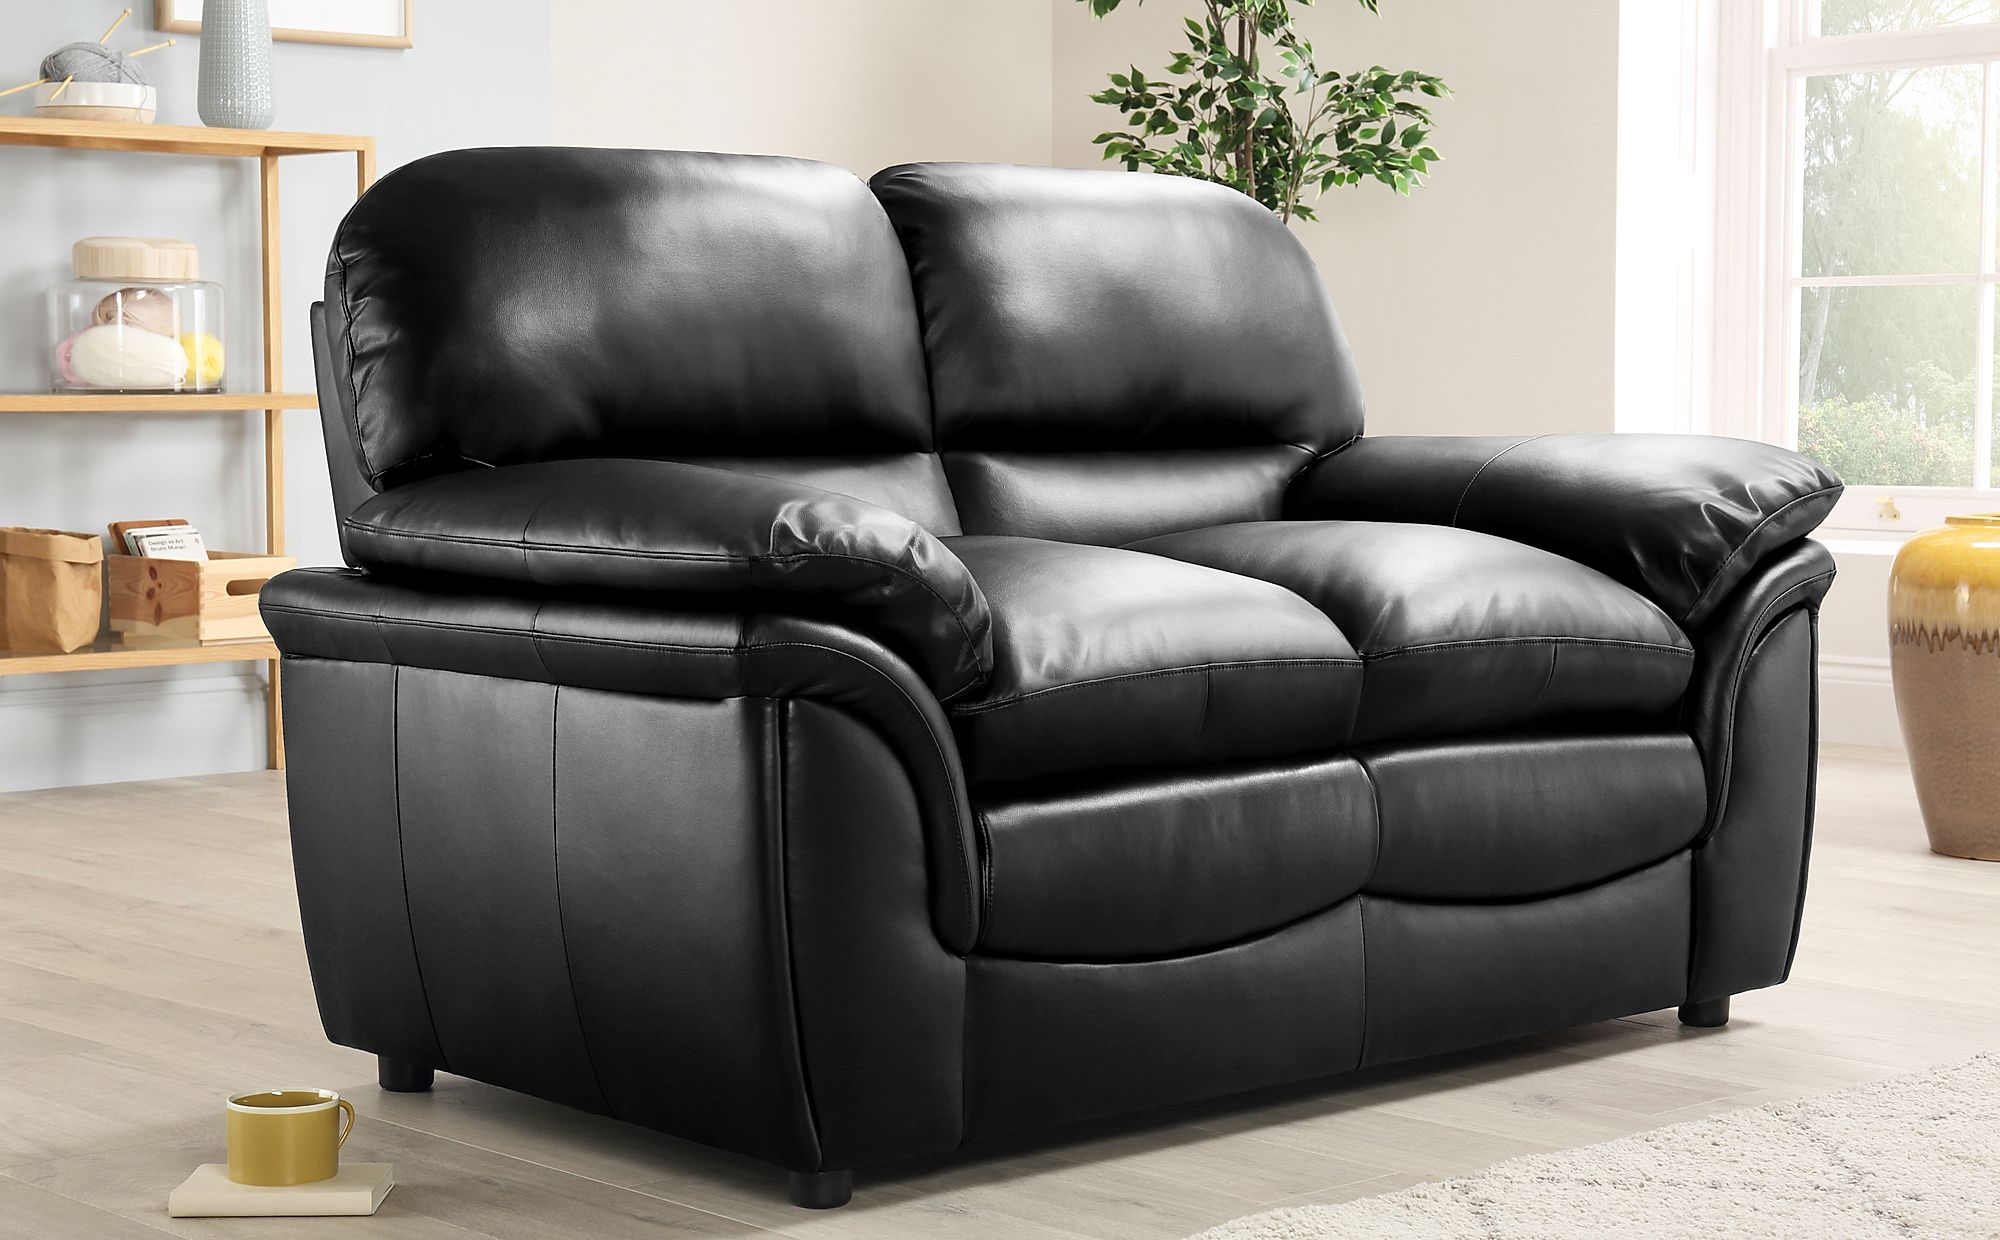 2 seater leather sofa with cup holders